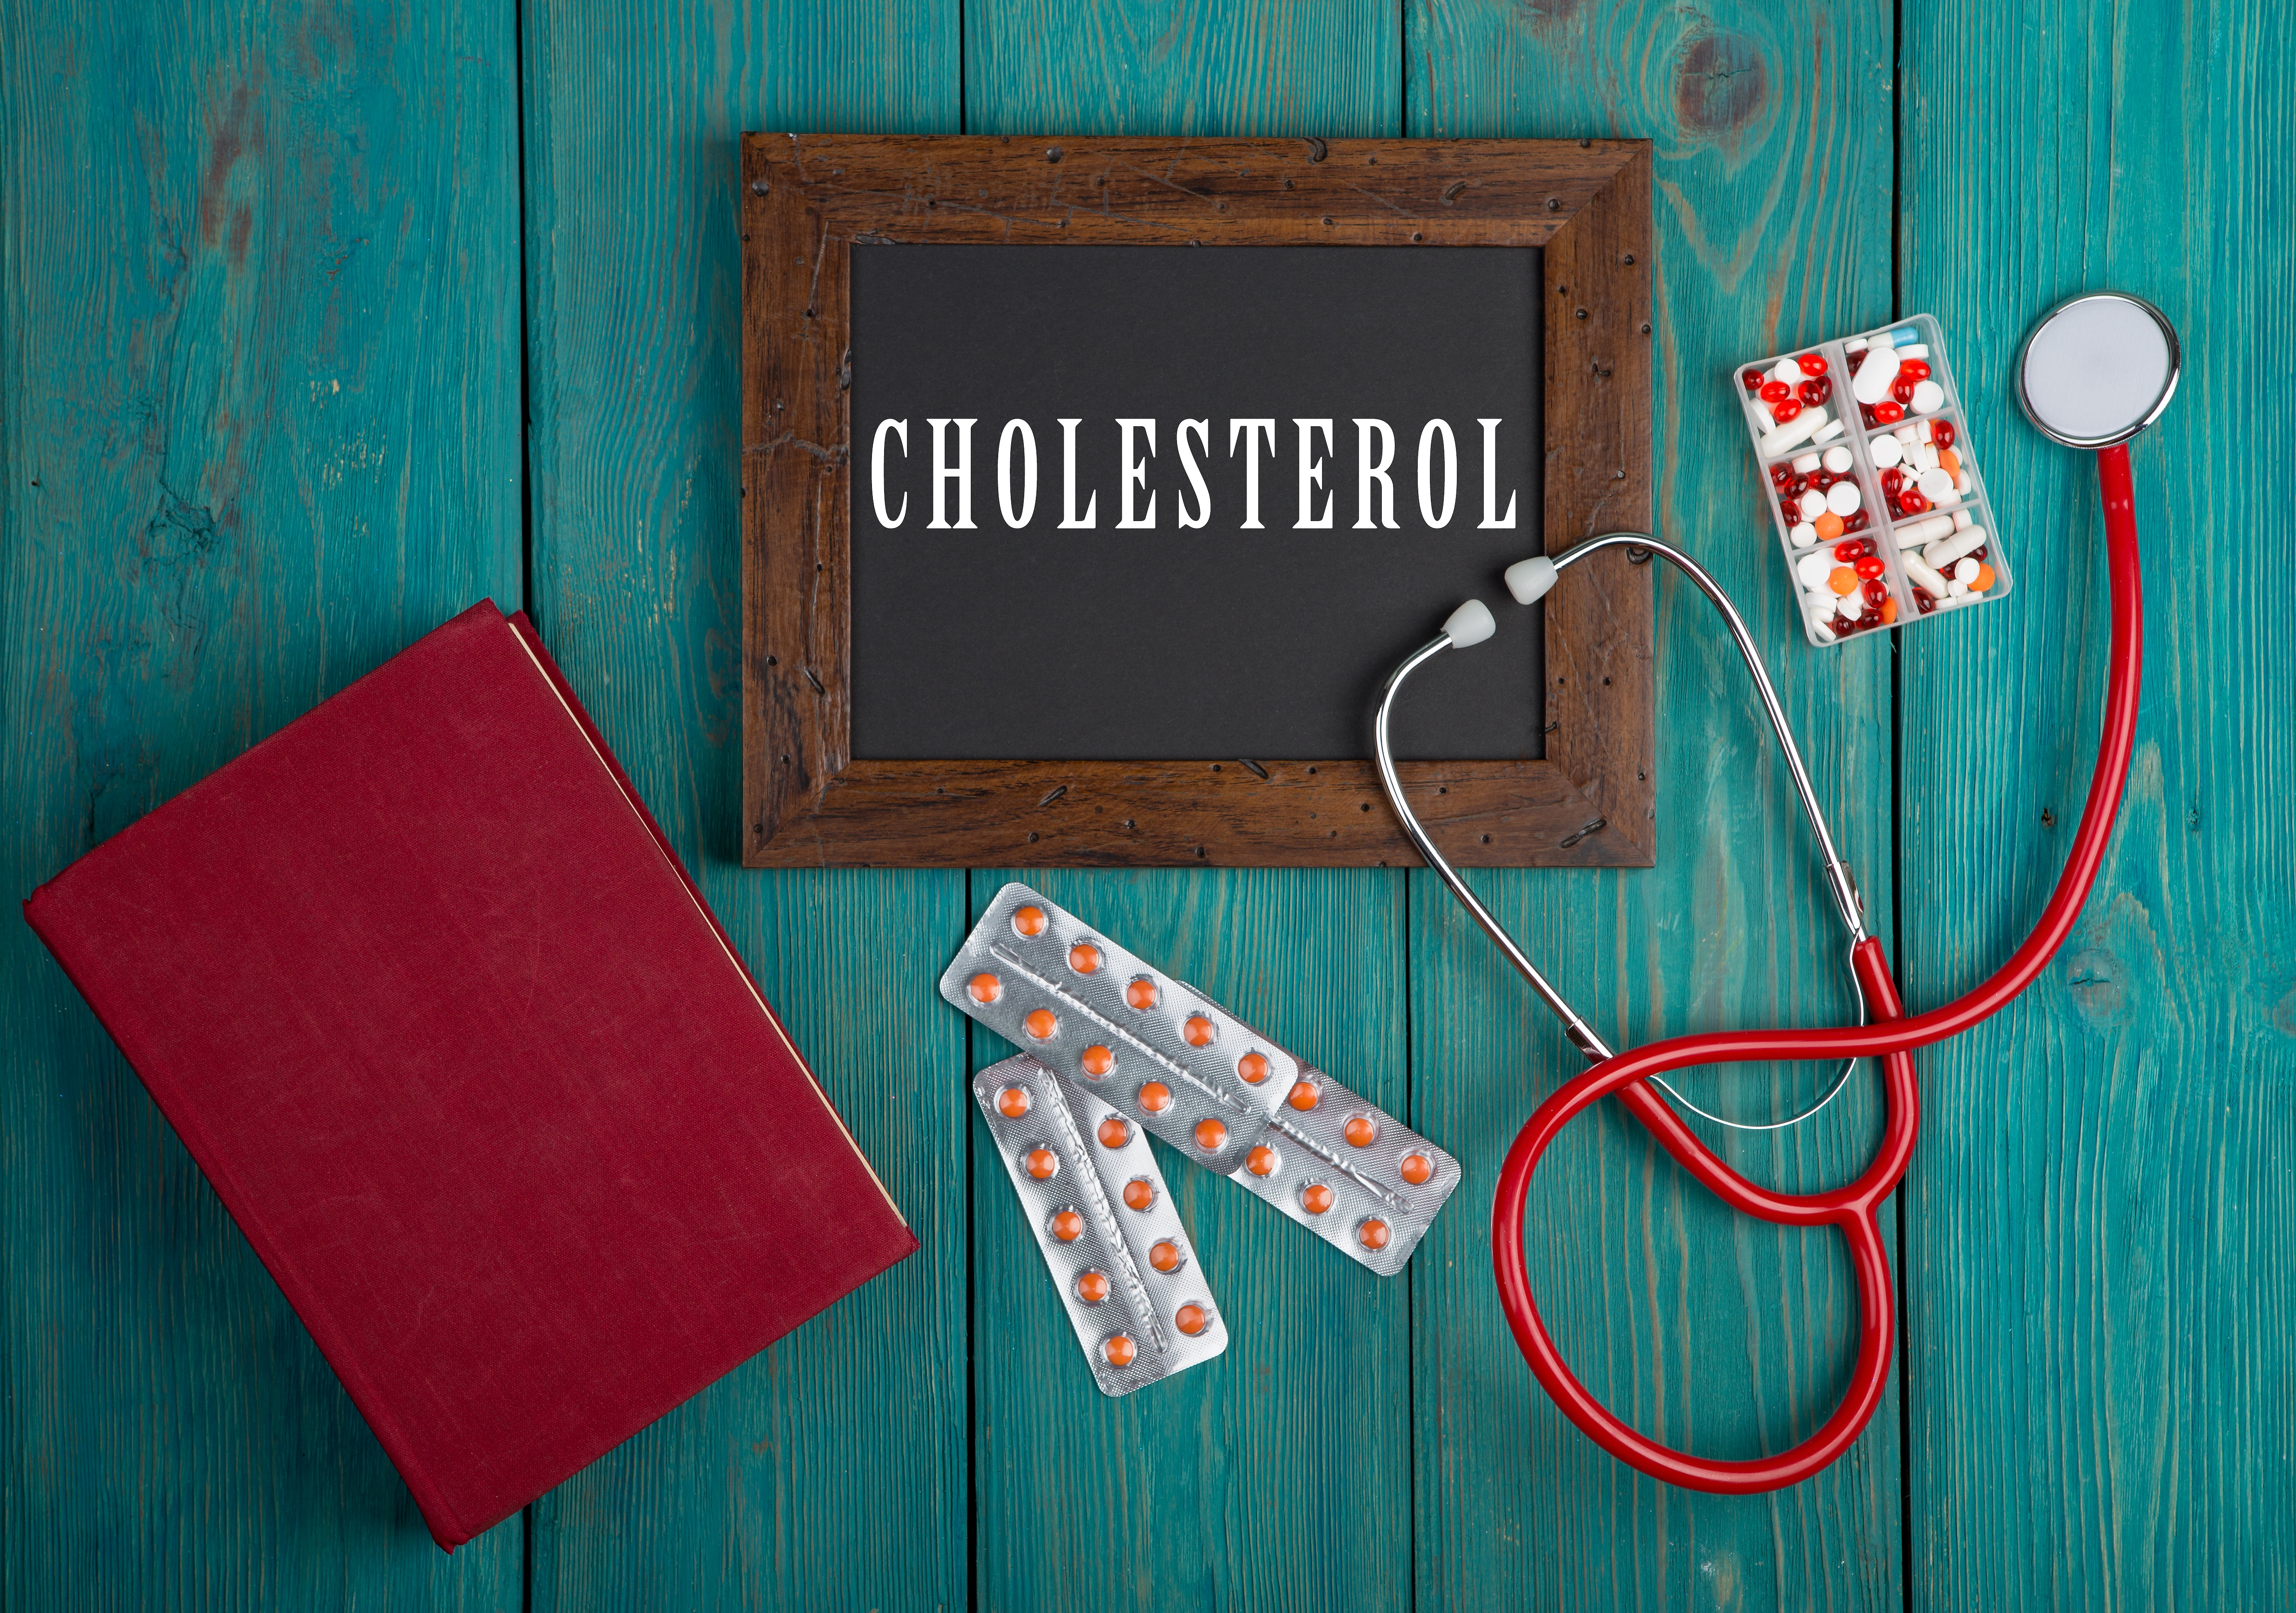 Can cholesterol medication affect my mouth, statin, cholesterol medication, periodontitis, atherosclerosis, your heart and mouth